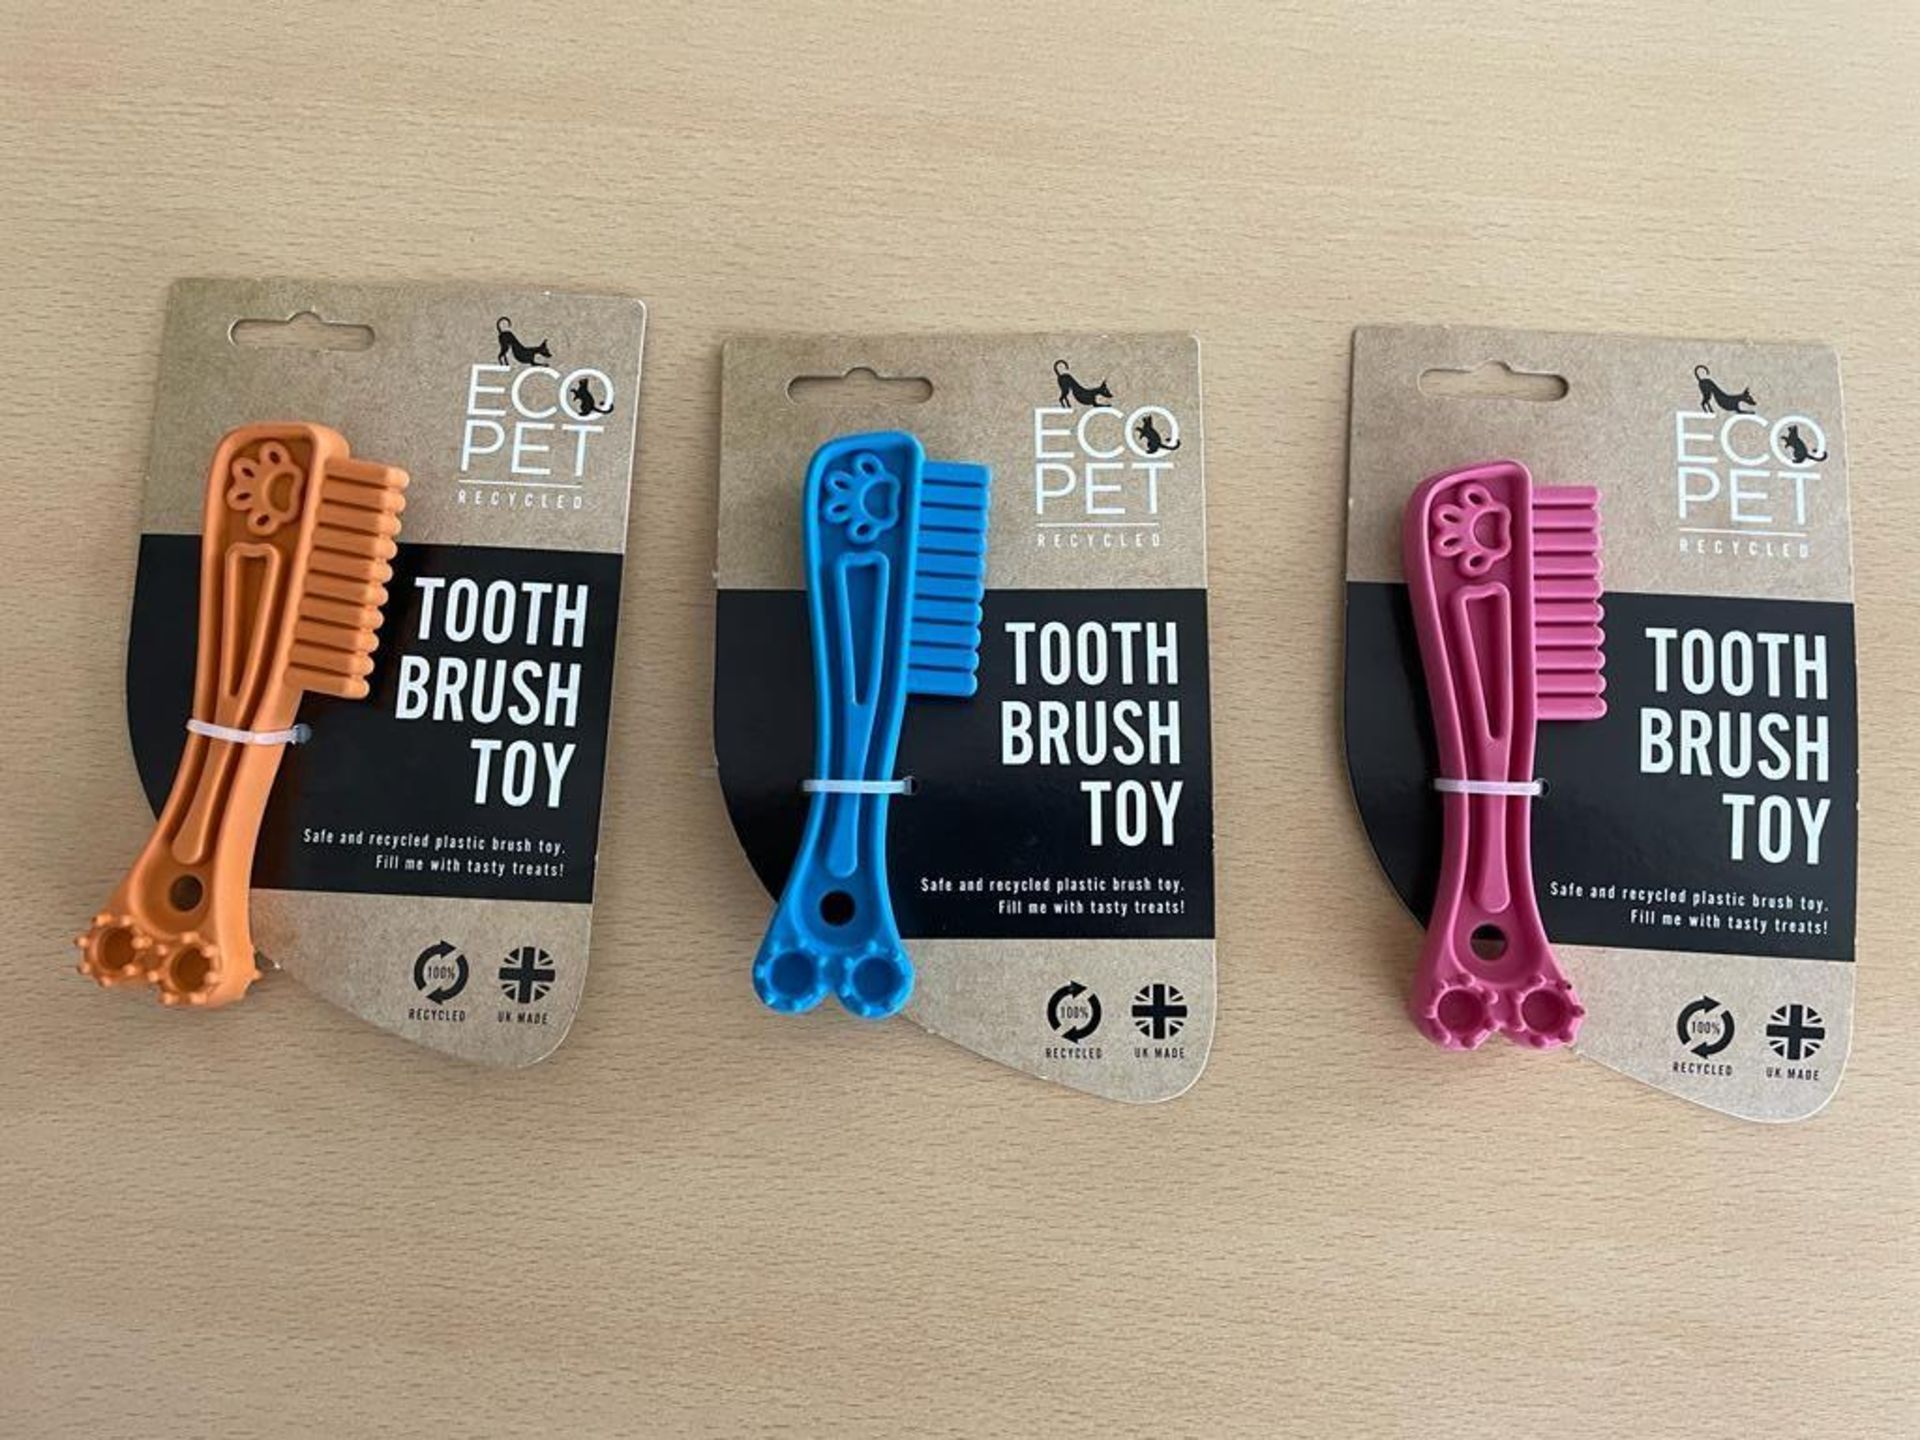 288 toothbrush shaped dog chew toys in assorted colours. Made in the UK from recycled polymer, bran